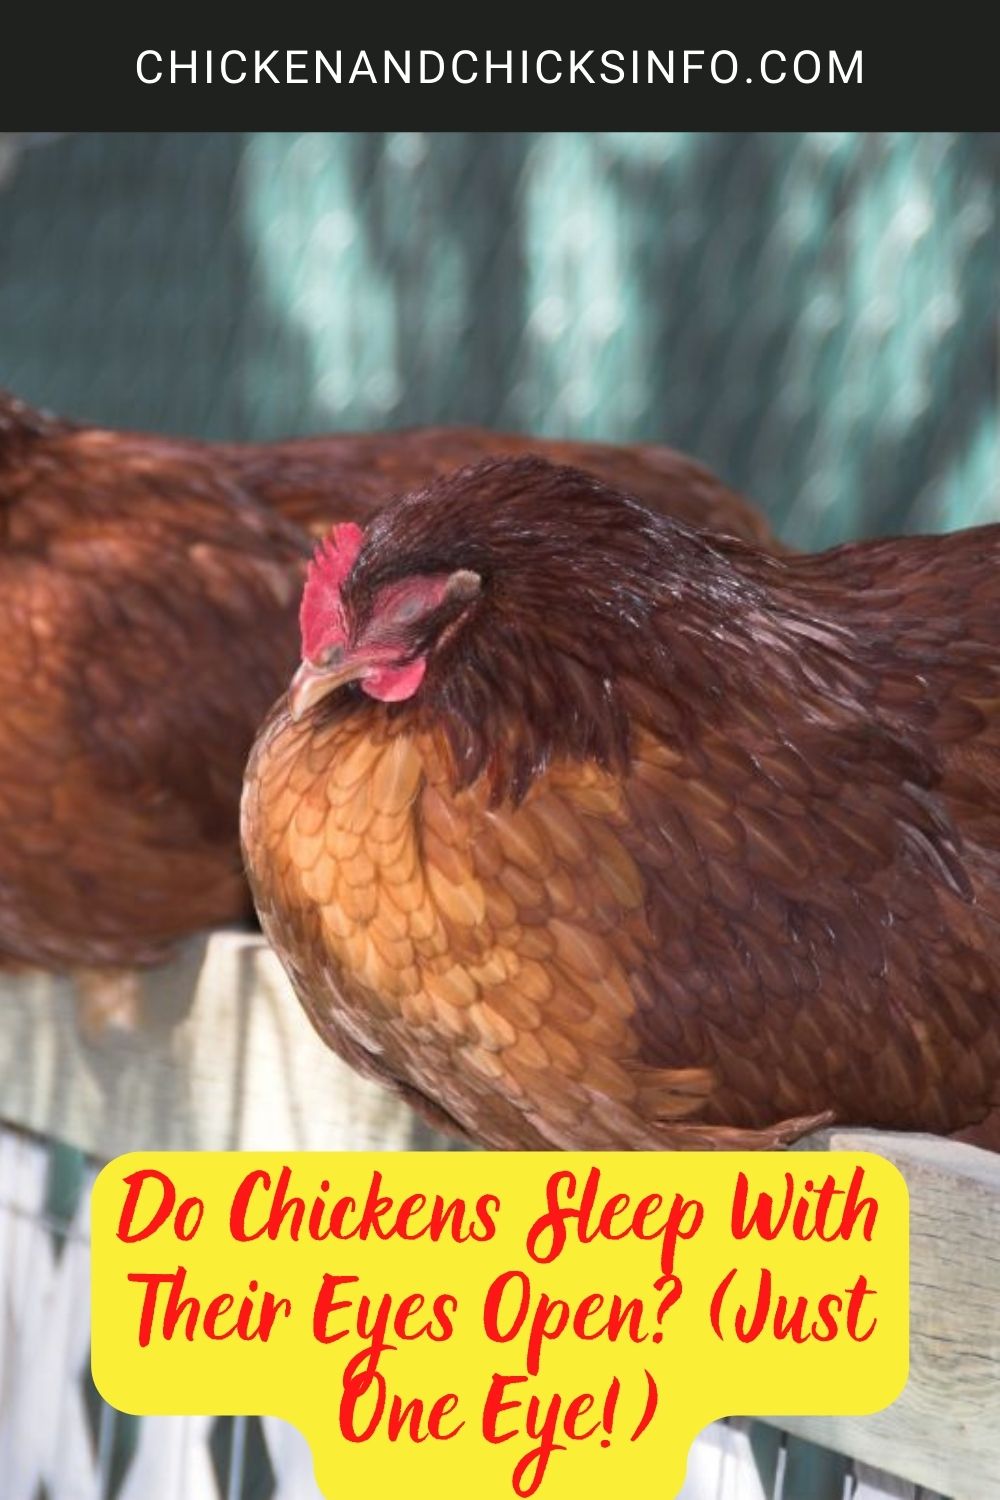 Do Chickens Sleep With Their Eyes Open? (Just One Eye!) poster.
